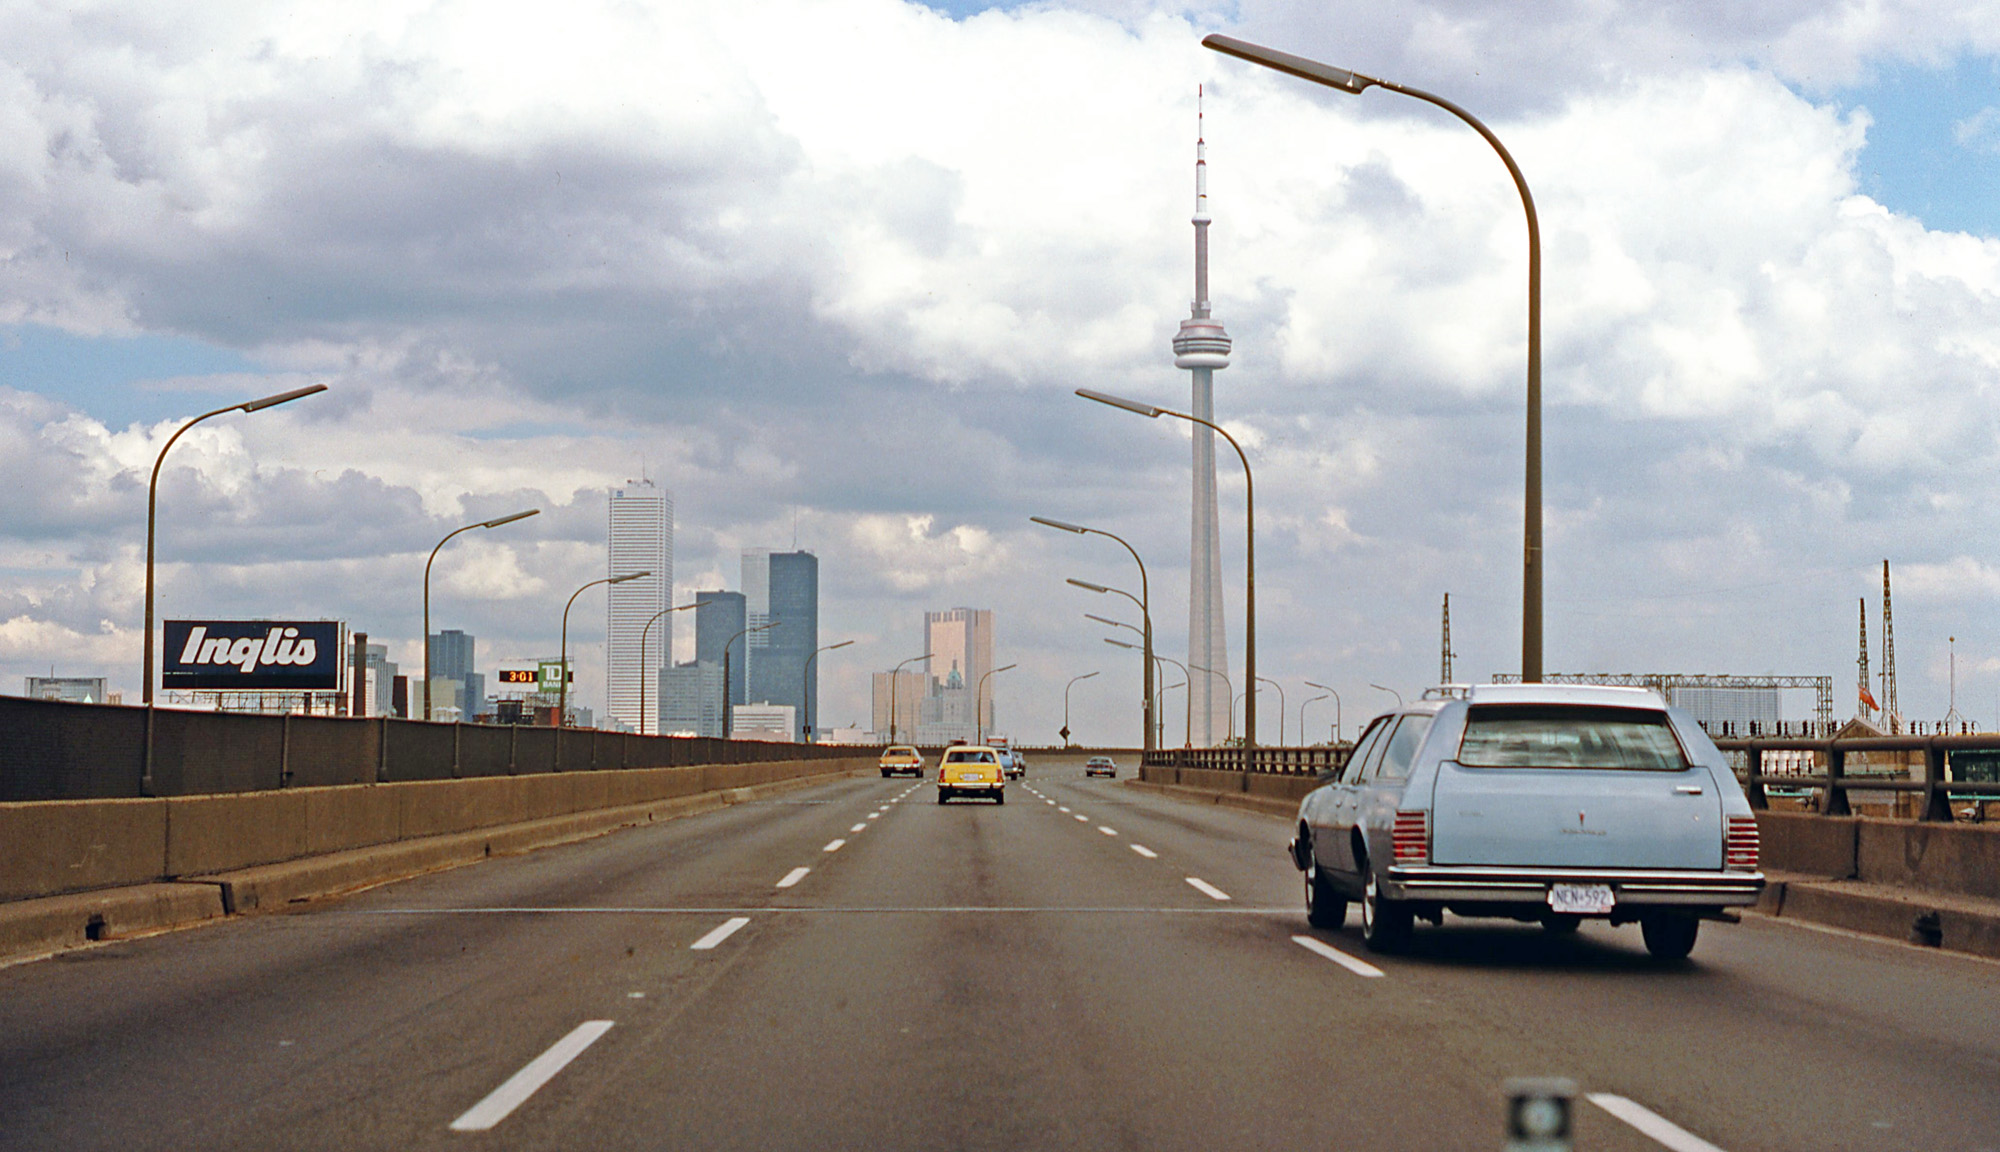 The last of three submissions on a trip to Toronto on the QEW, Labour Day 1979. Now I'm on the Gardiner Expressway, an elevated waterfront highway opened in the late 1950s. Downtown Toronto and the CN Tower are center of view, a scene that looks dramatically changed from this Gardiner view today. View full size.